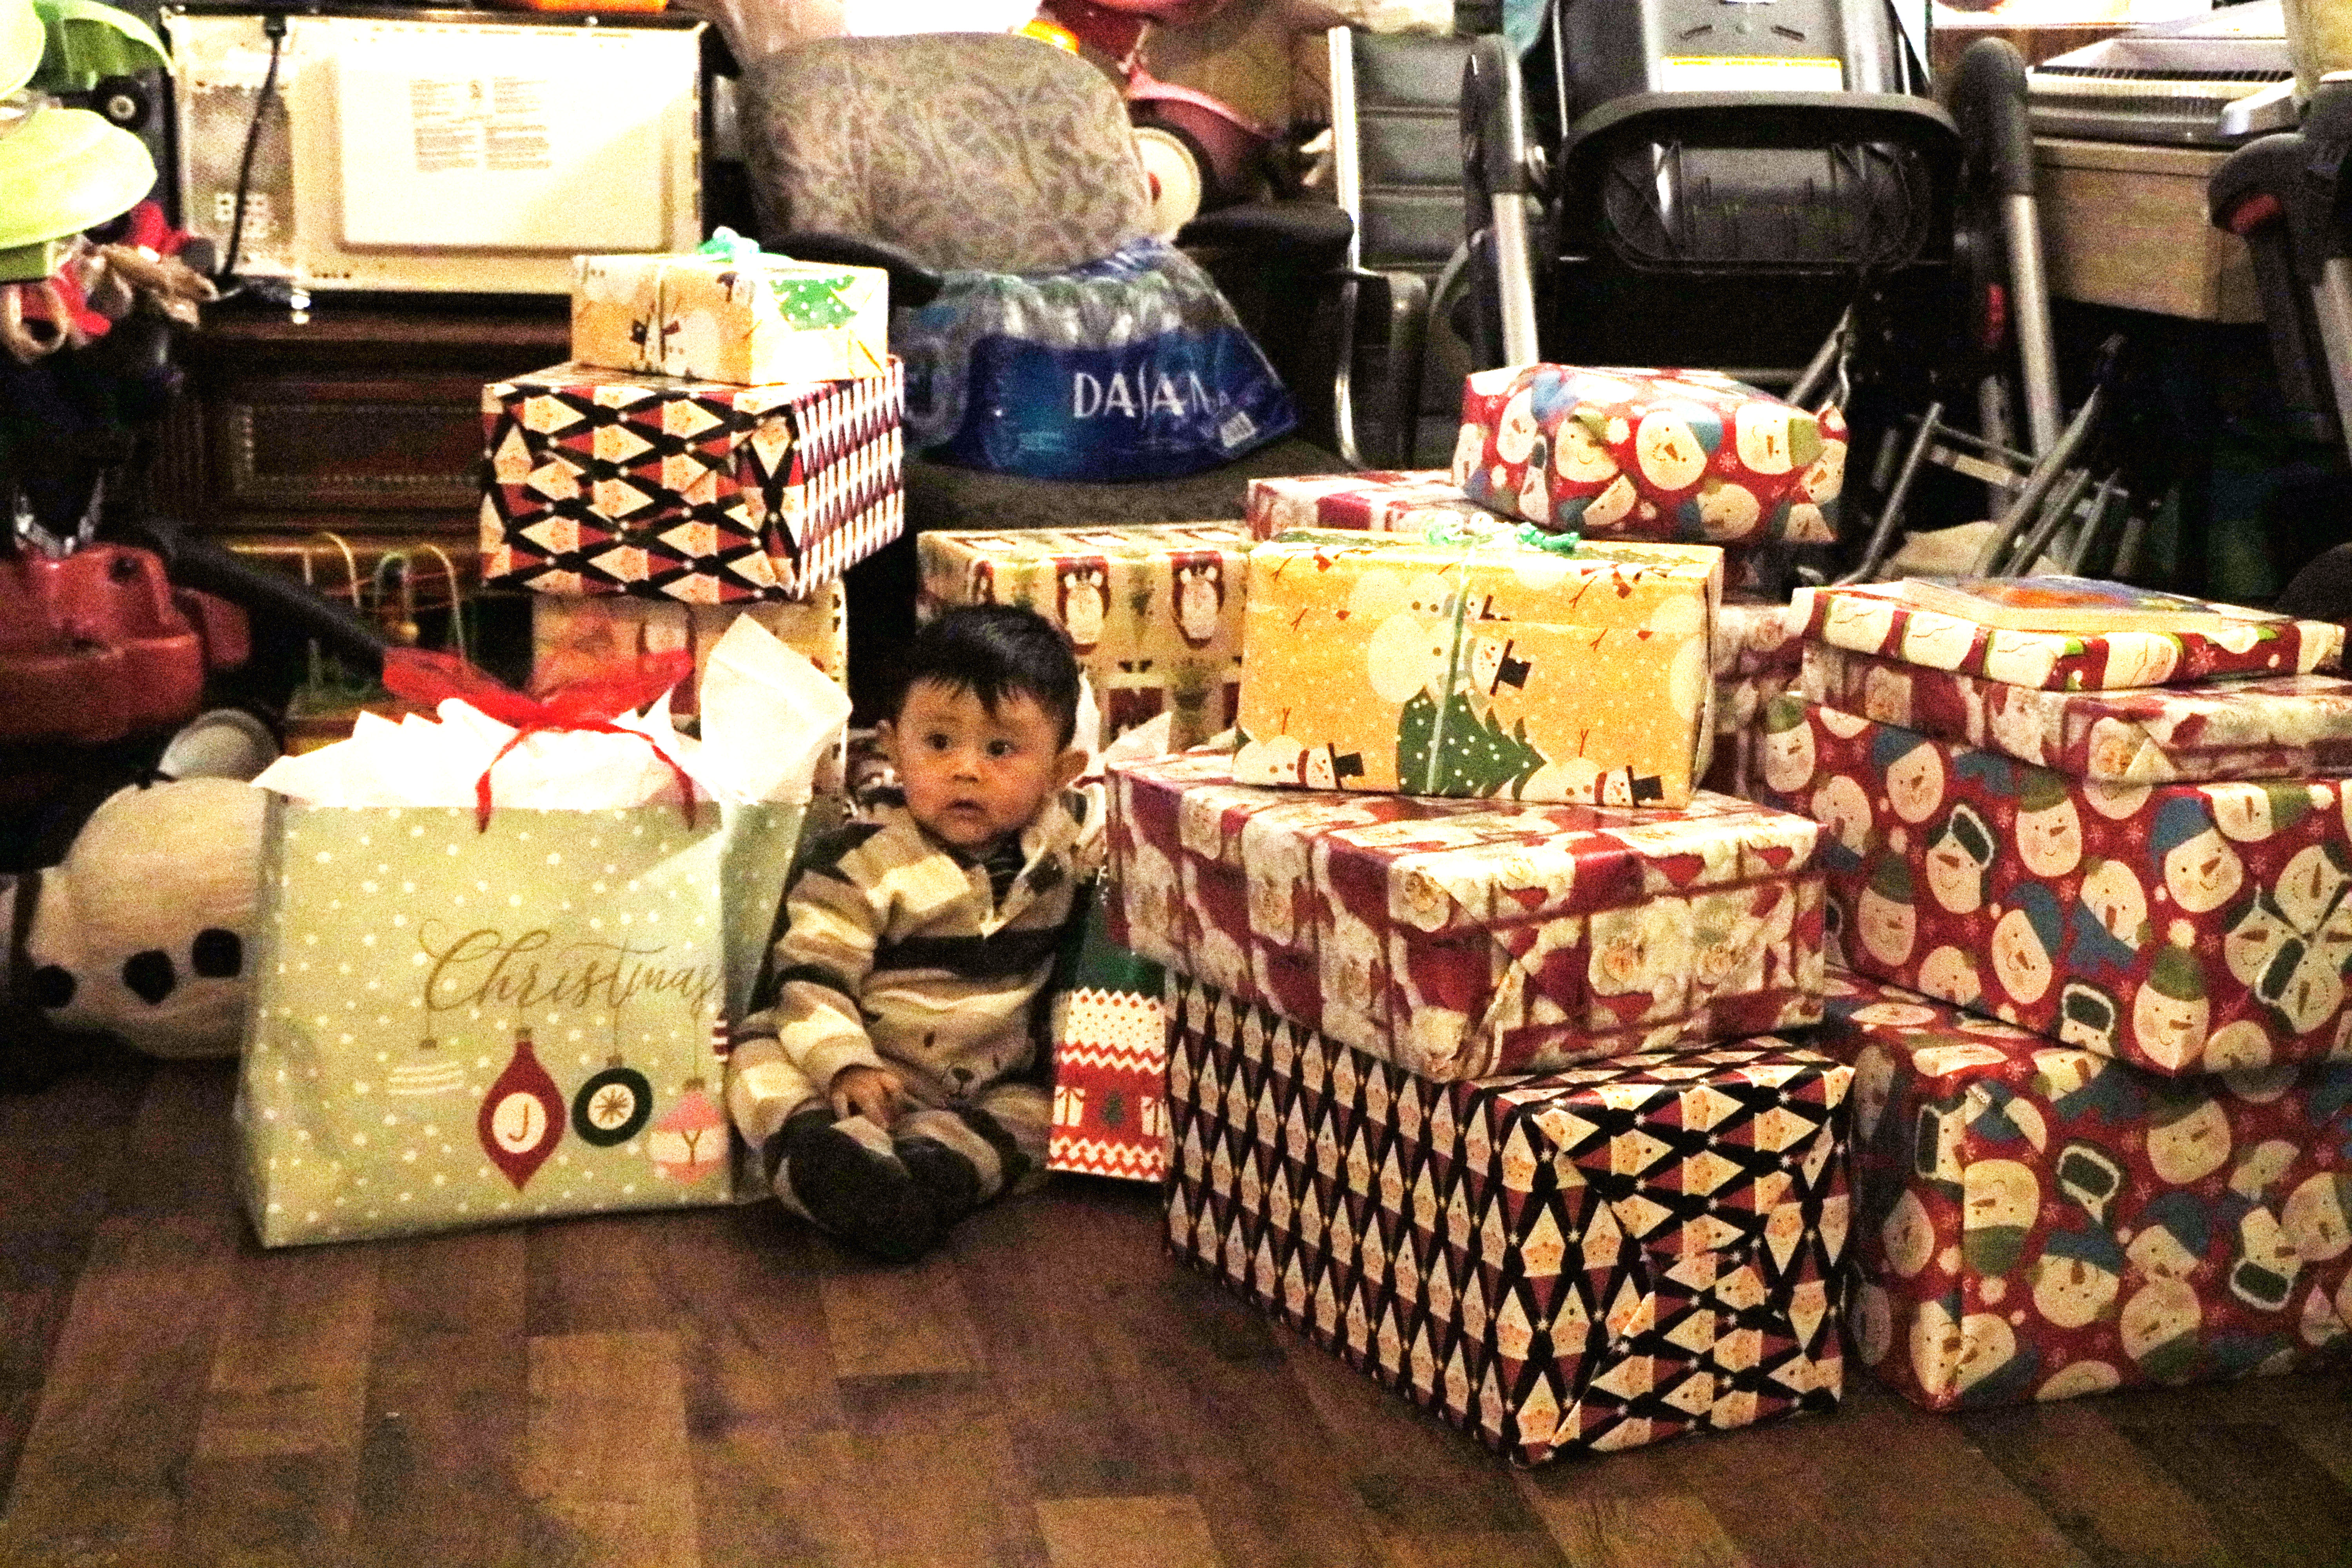 Toddler sits on floor among a stack of holiday presents